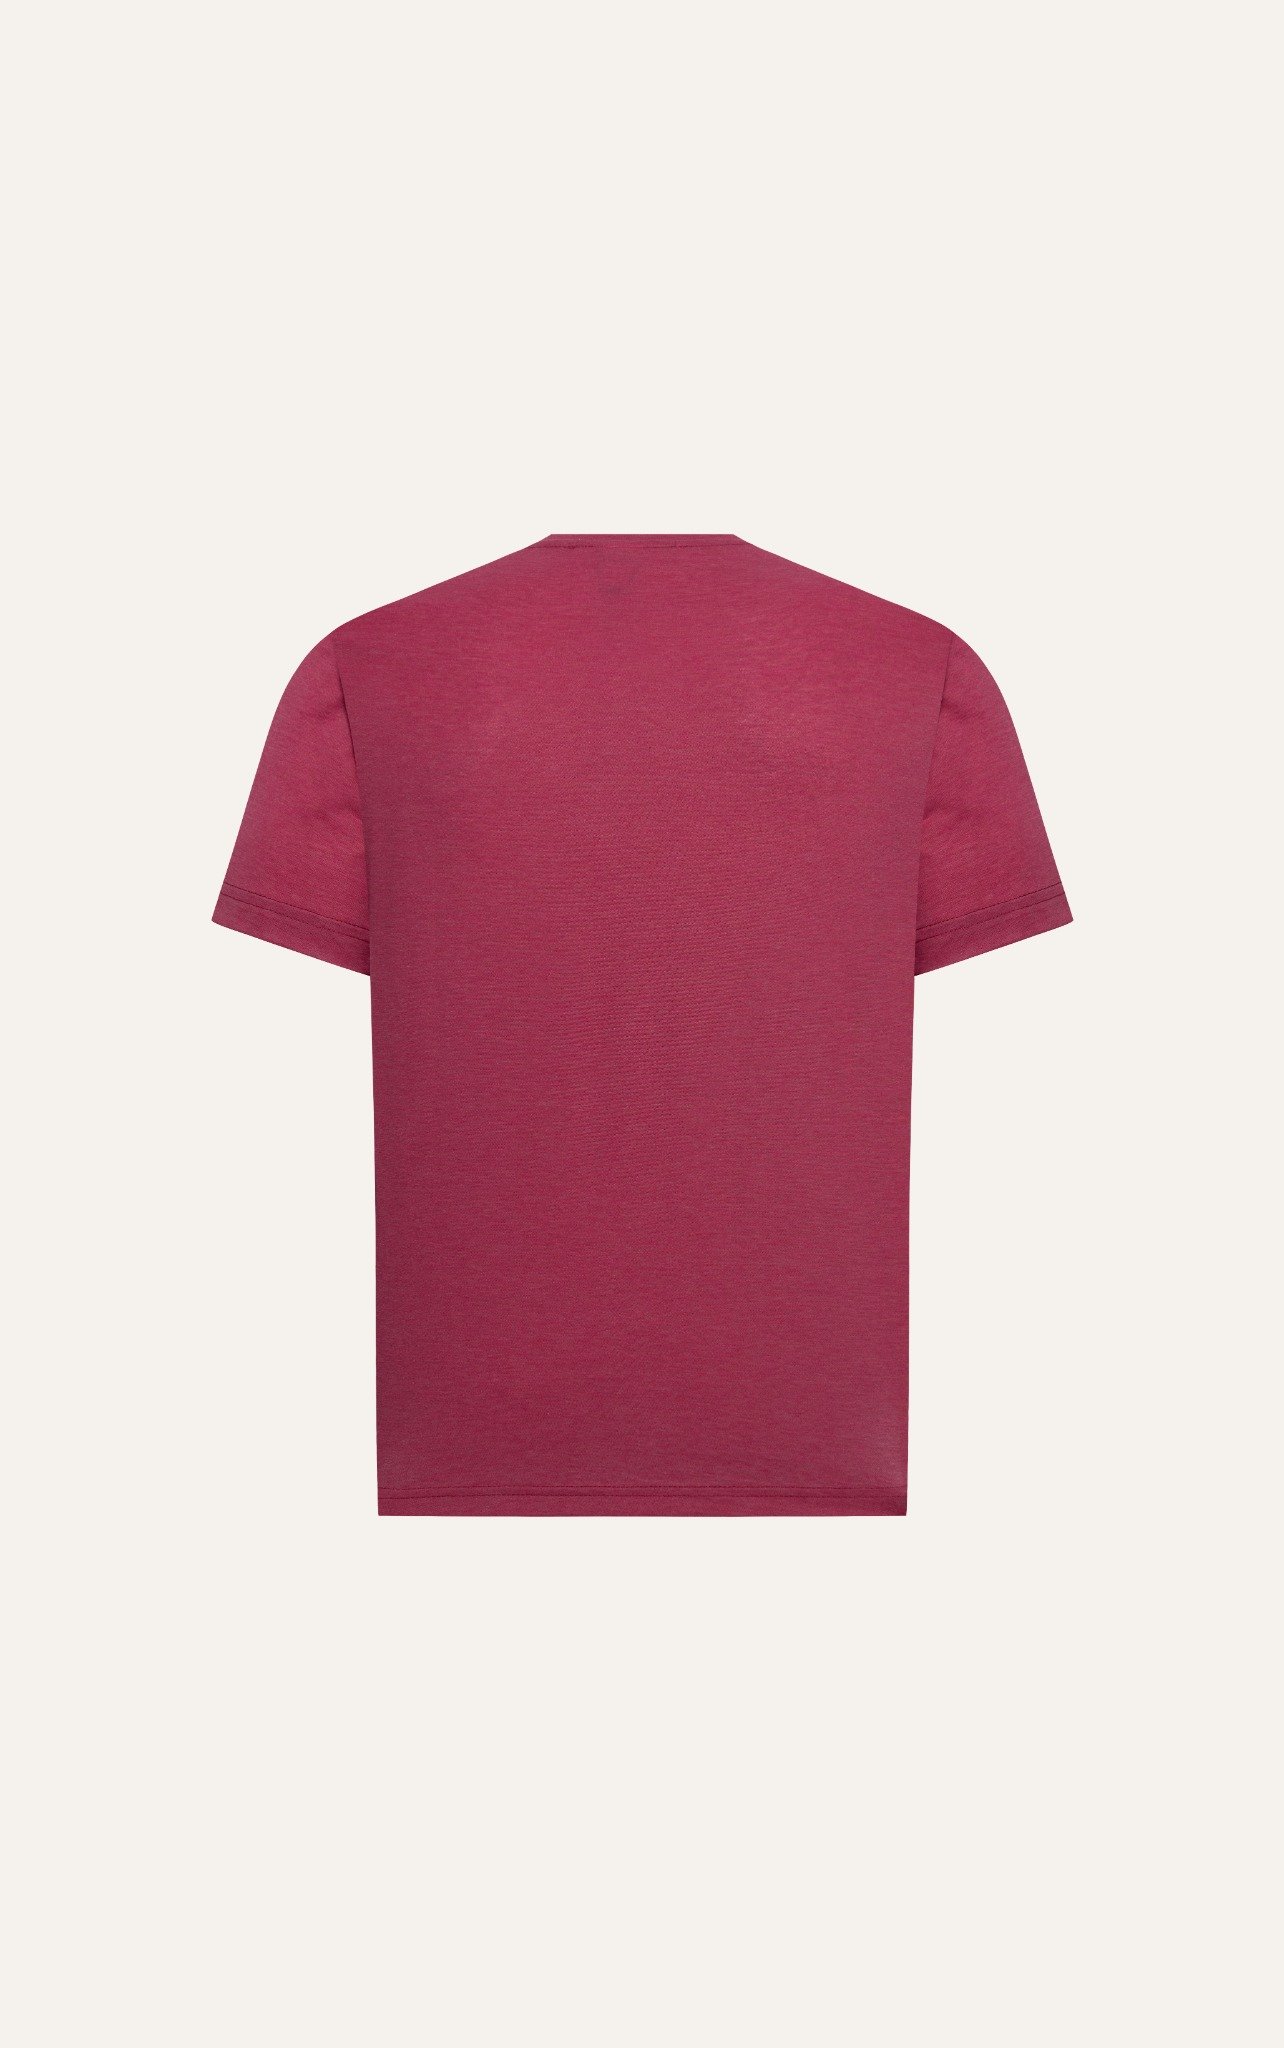 AG60 FACTORY REGULAR FIT EMBROIDERED "AMUS" T-SHIRT - PINK